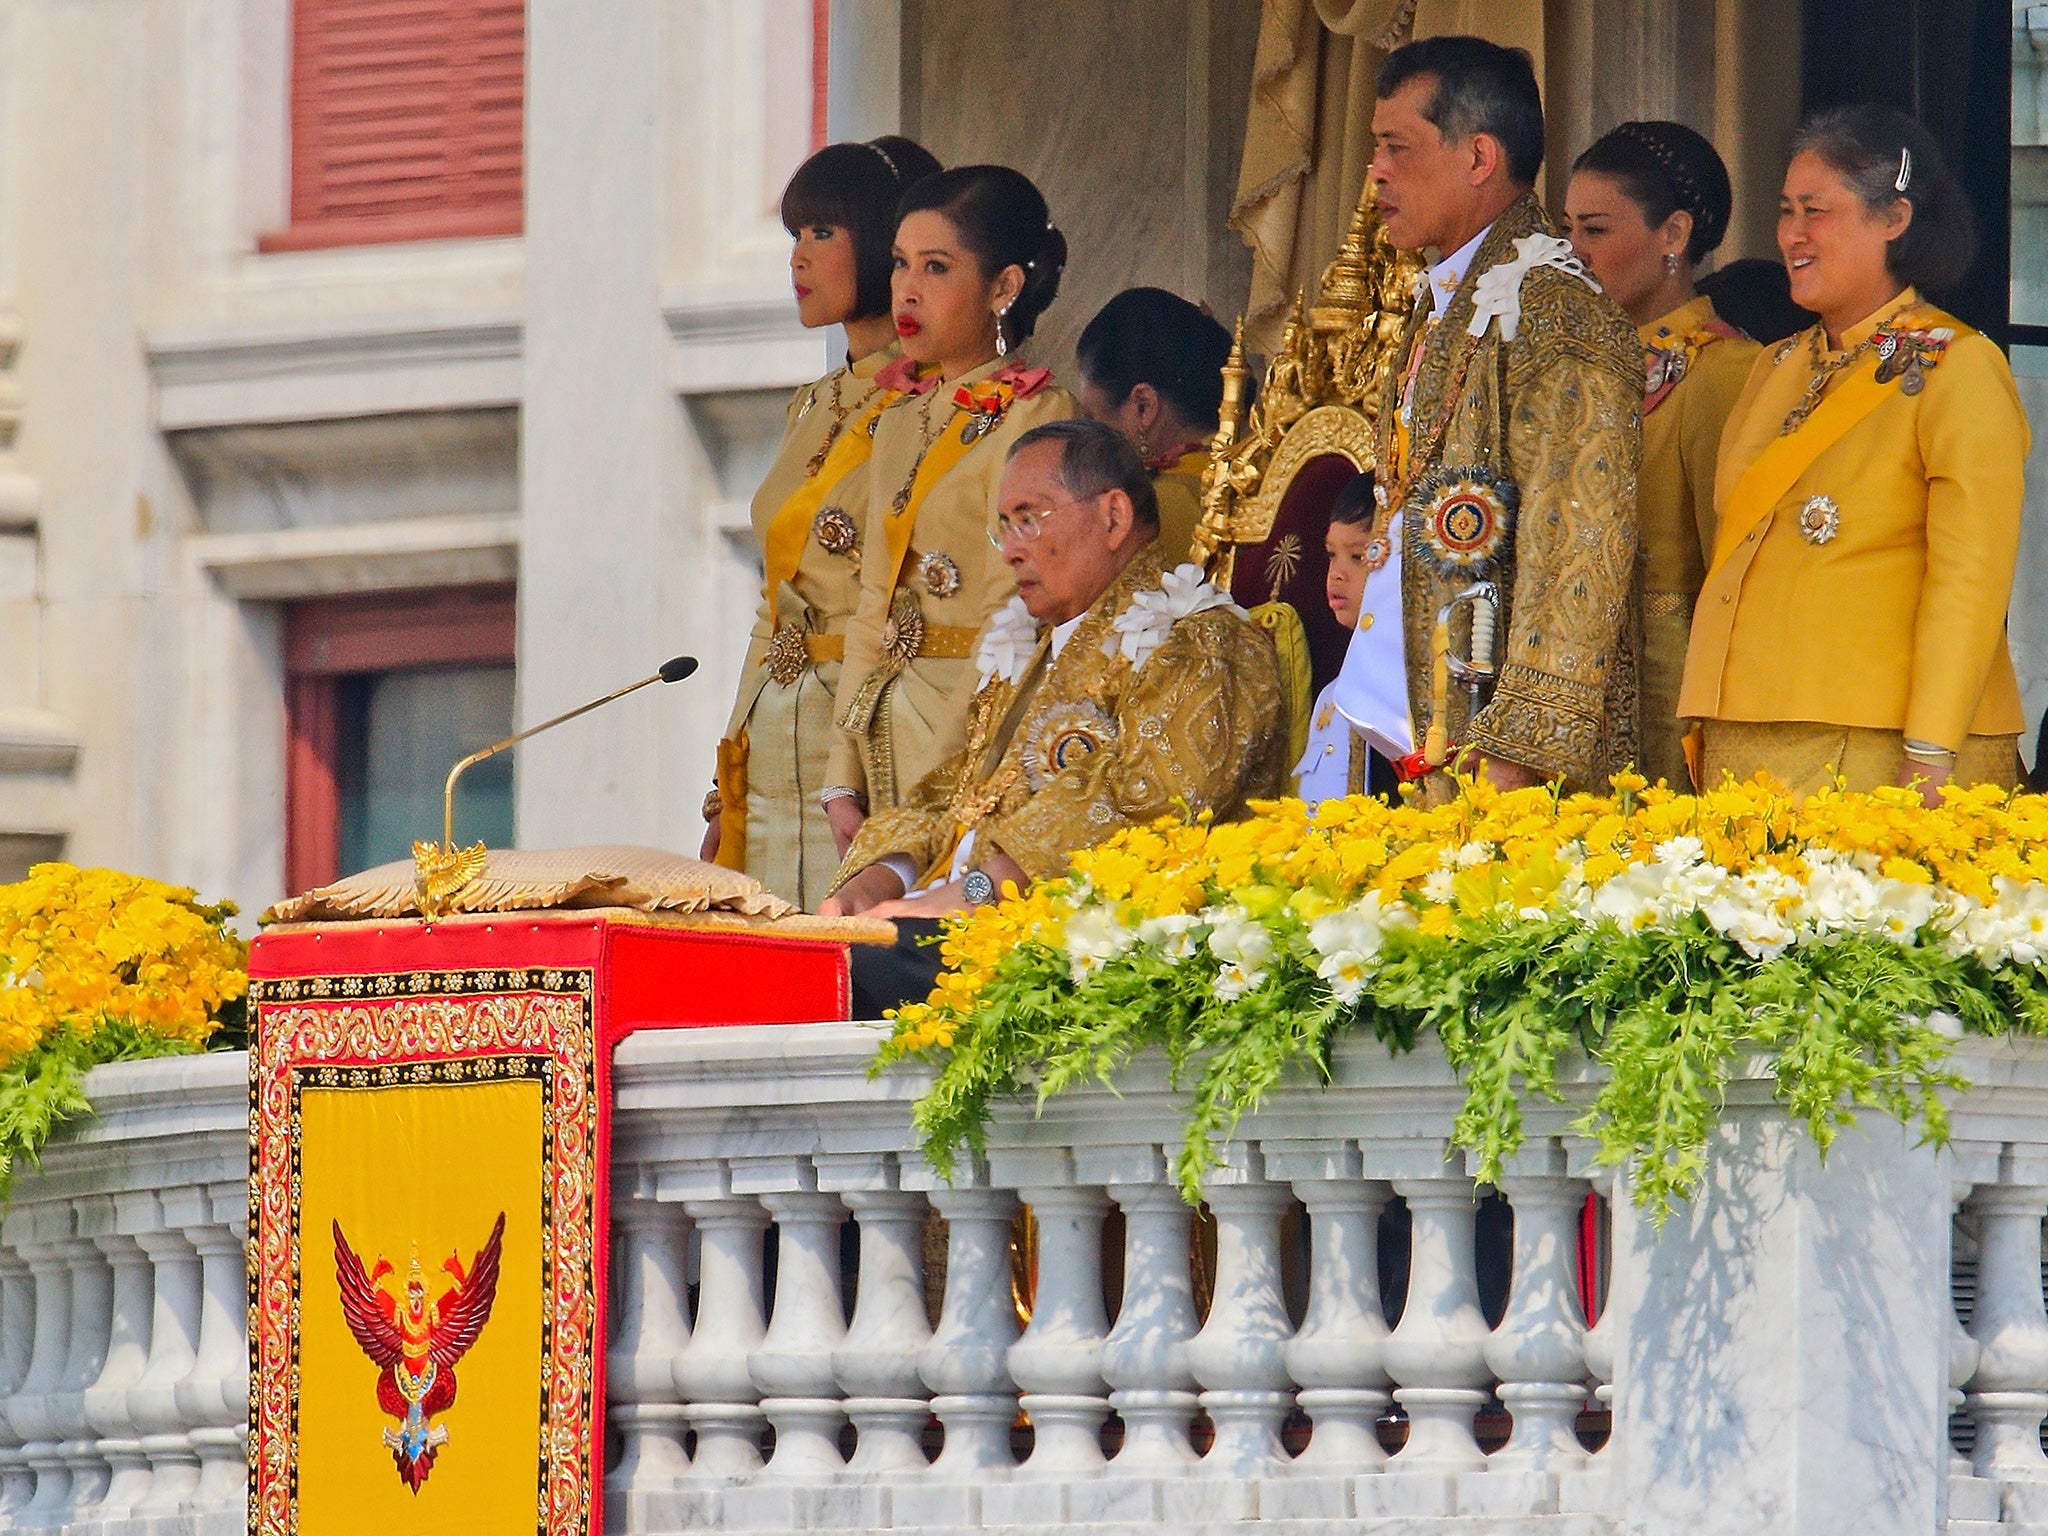 Thailand's King Bhumibol Adulyadej, surrounded by his daughters and his son, Crown Prince Vajiralongkorn,